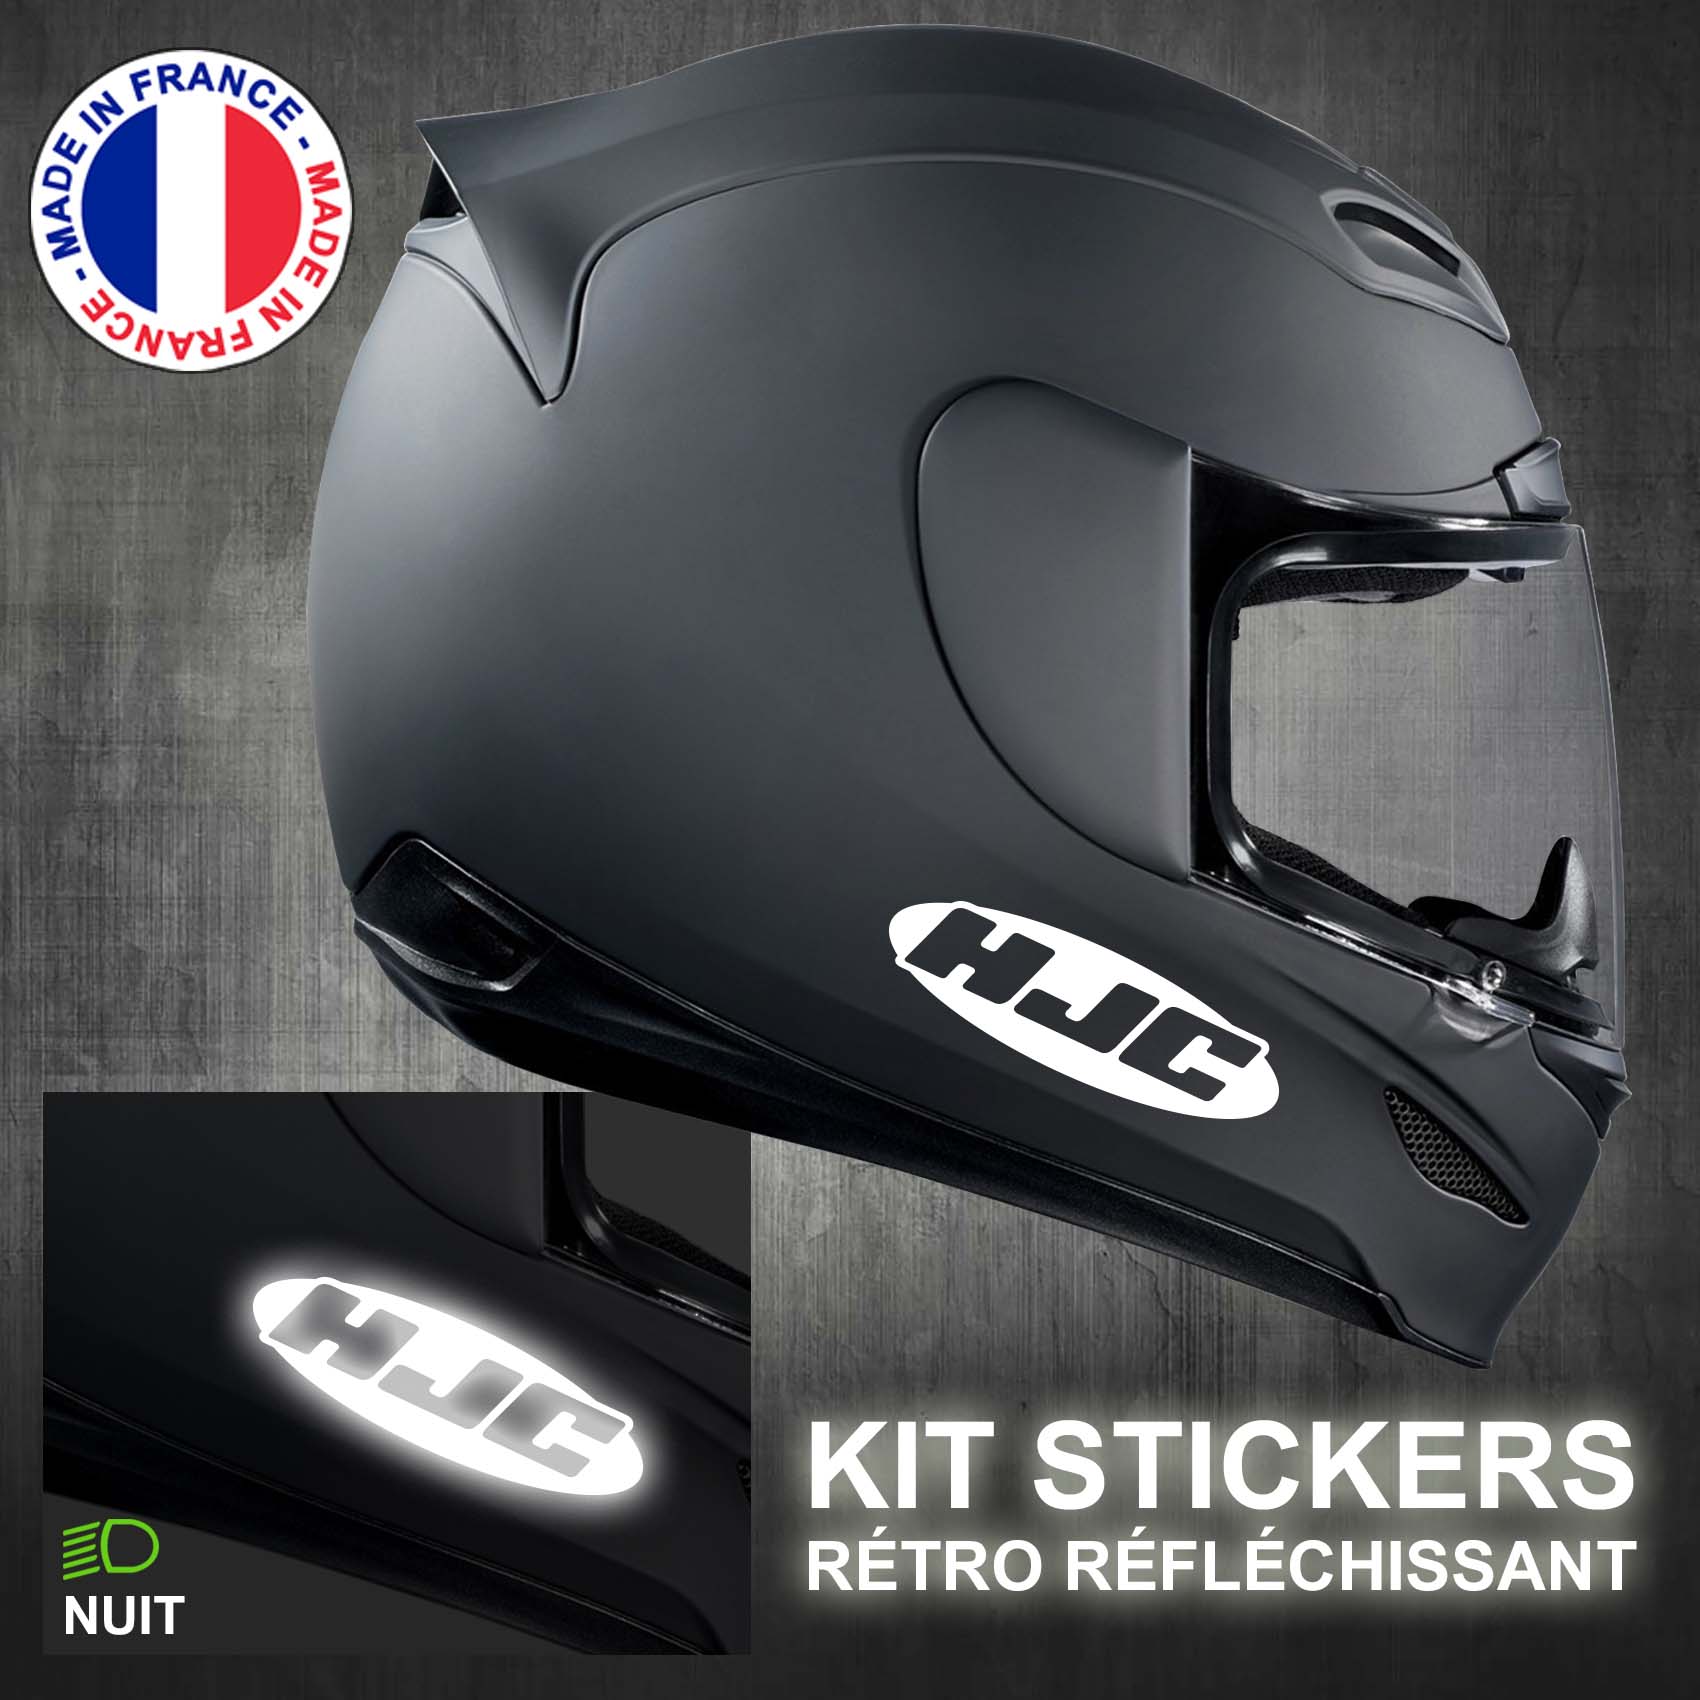 stickers-casque-moto-hjc-ref3-retro-reflechissant-autocollant-noir-moto-velo-tuning-racing-route-sticker-casques-adhesif-scooter-nuit-securite-decals-personnalise-personnalisable-min